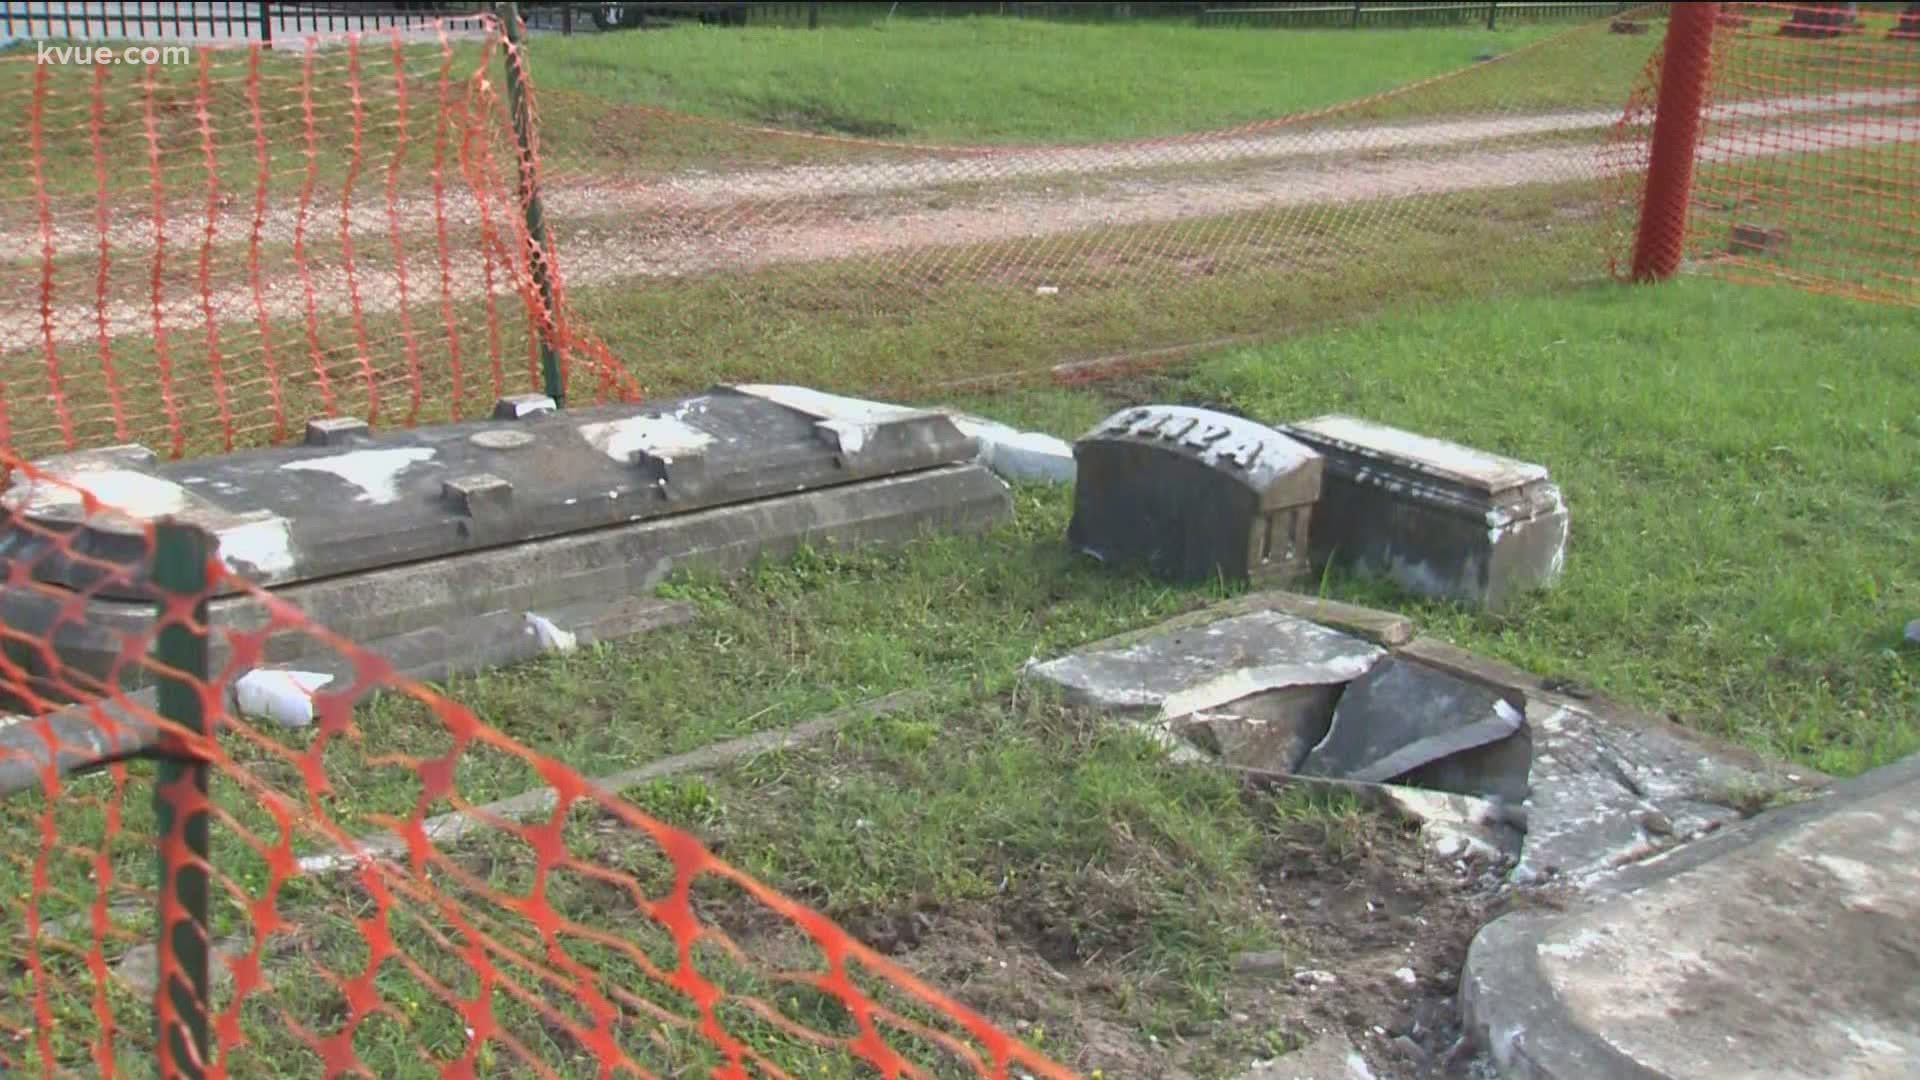 Oakwood Cemetery, the oldest cemetery in Austin, is dealing with damage after a car plowed through headstones early Tuesday morning.